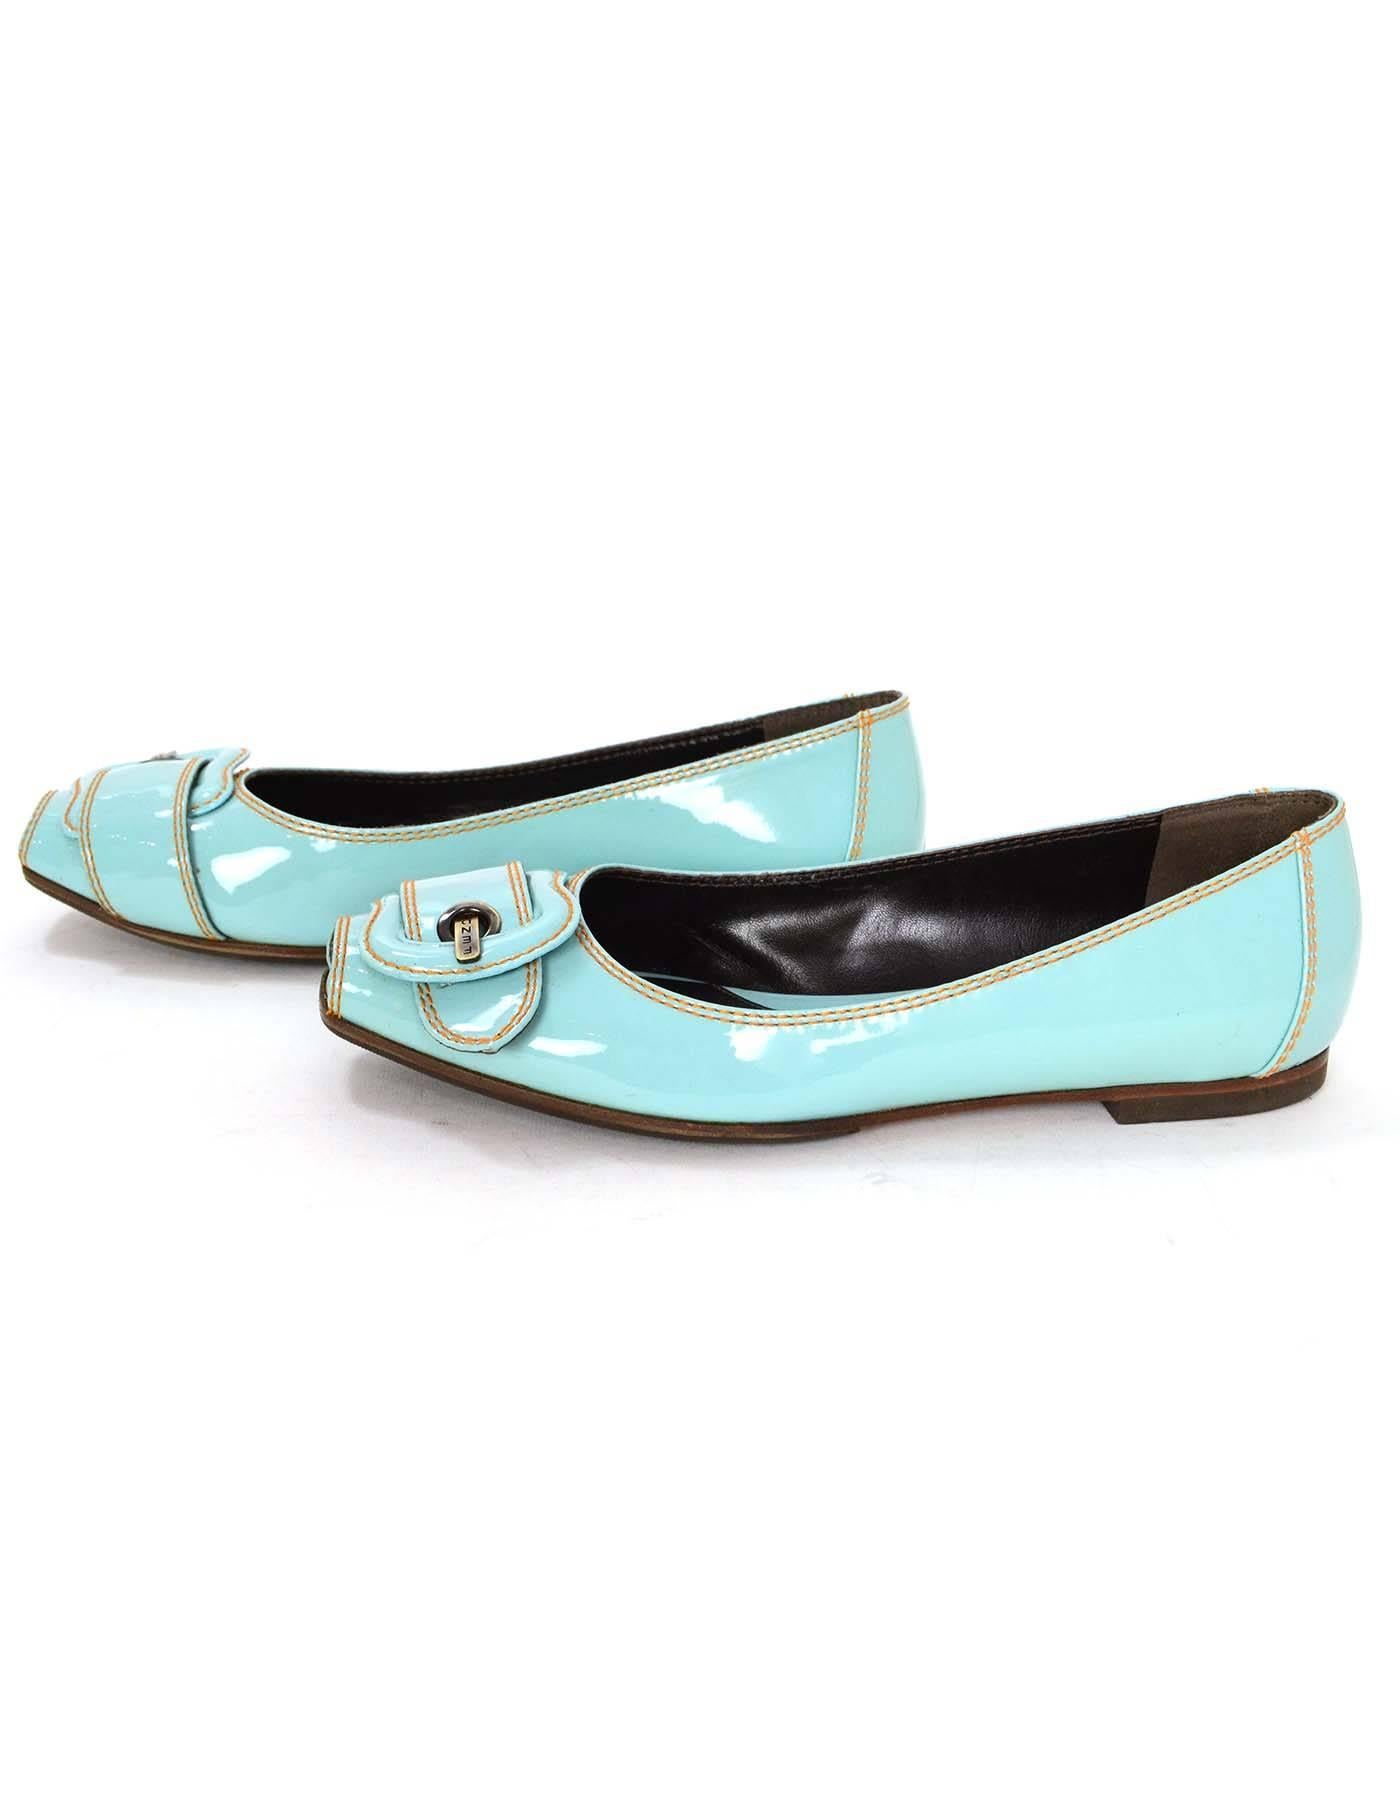 Fendi Light Blue Patent Peep-Toe Flats 
Features Fendi buckle at toe 
Made In: Italy
Color: Light blue
Materials: Patent leather
Closure/Opening: None
Sole Stamp: Fendi Made in Italy Vero Cuoio 37 1/2
Overall Condition: Excellent pre-owned